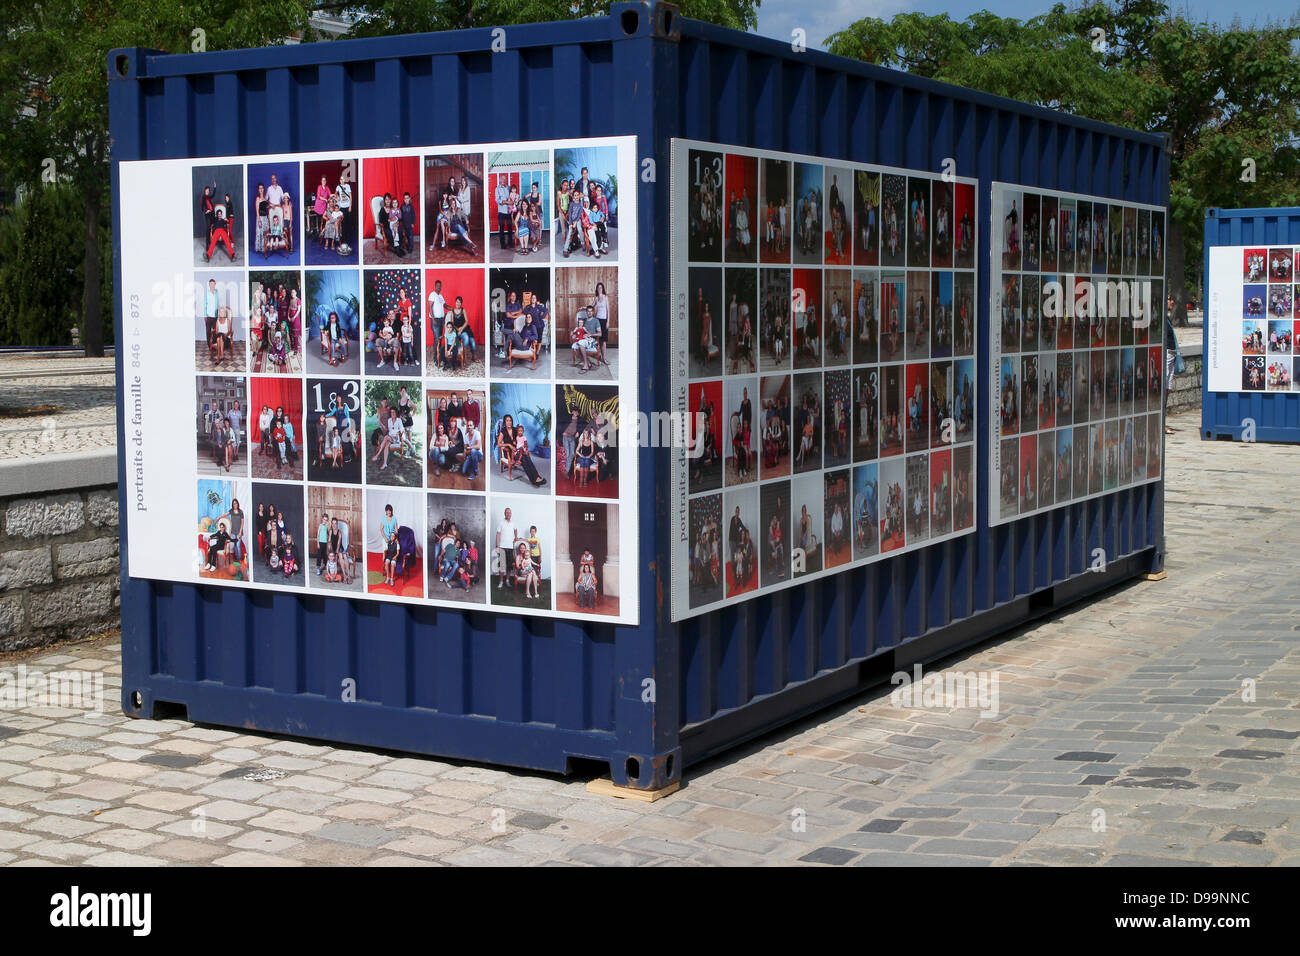 Marseille (France) June 15th to August 31st 2013 : Exposition of family portraits in the 26th century park © Roland Bouvier/Alam Stock Photo